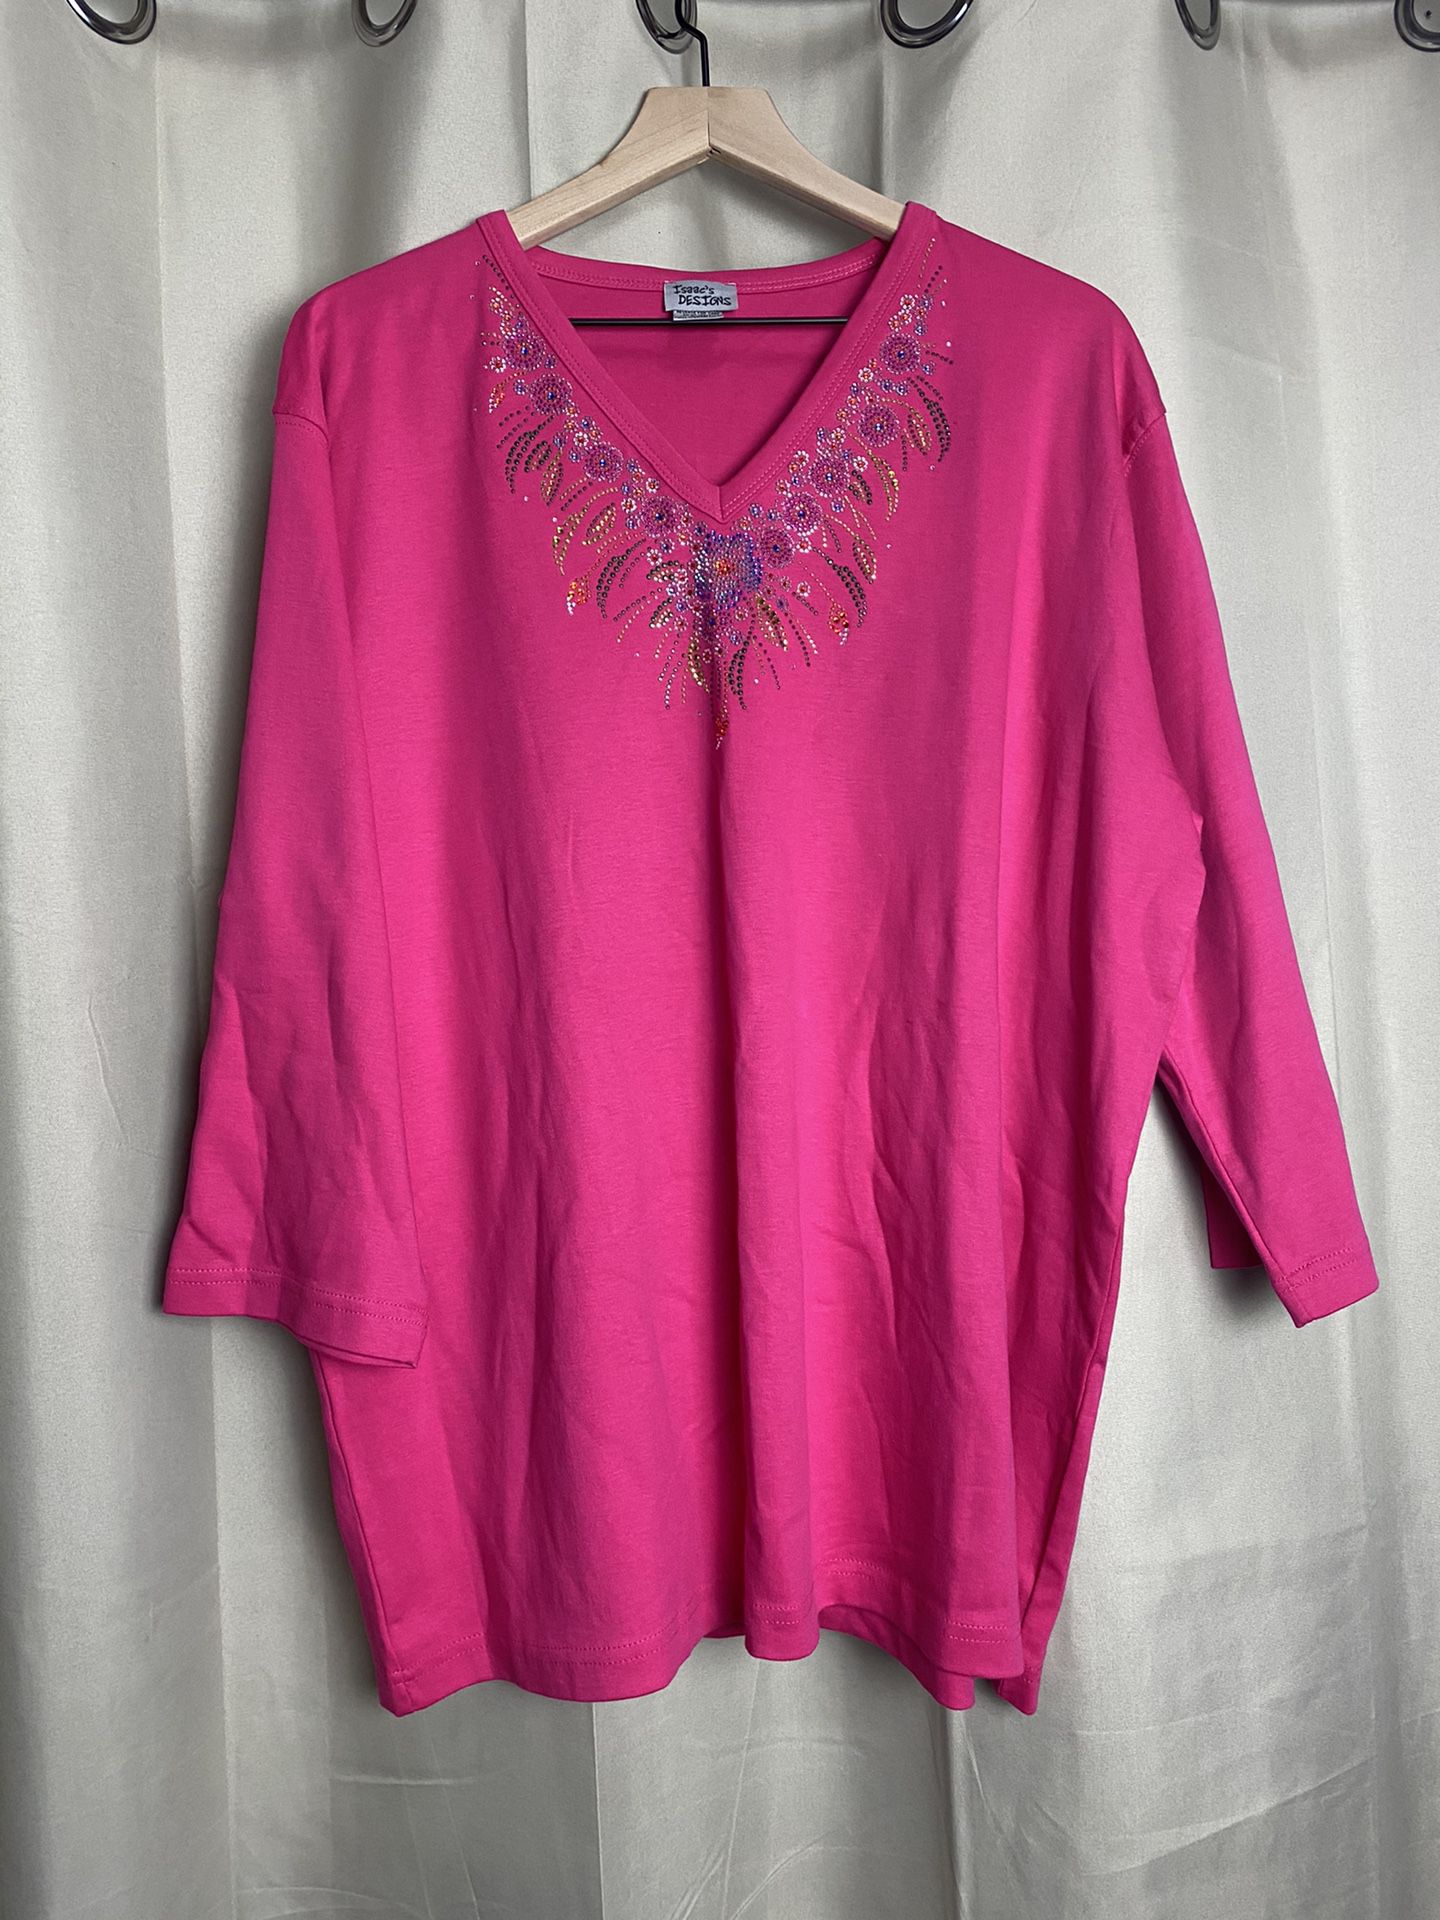 Women’s hot pink embroidered blouse size large